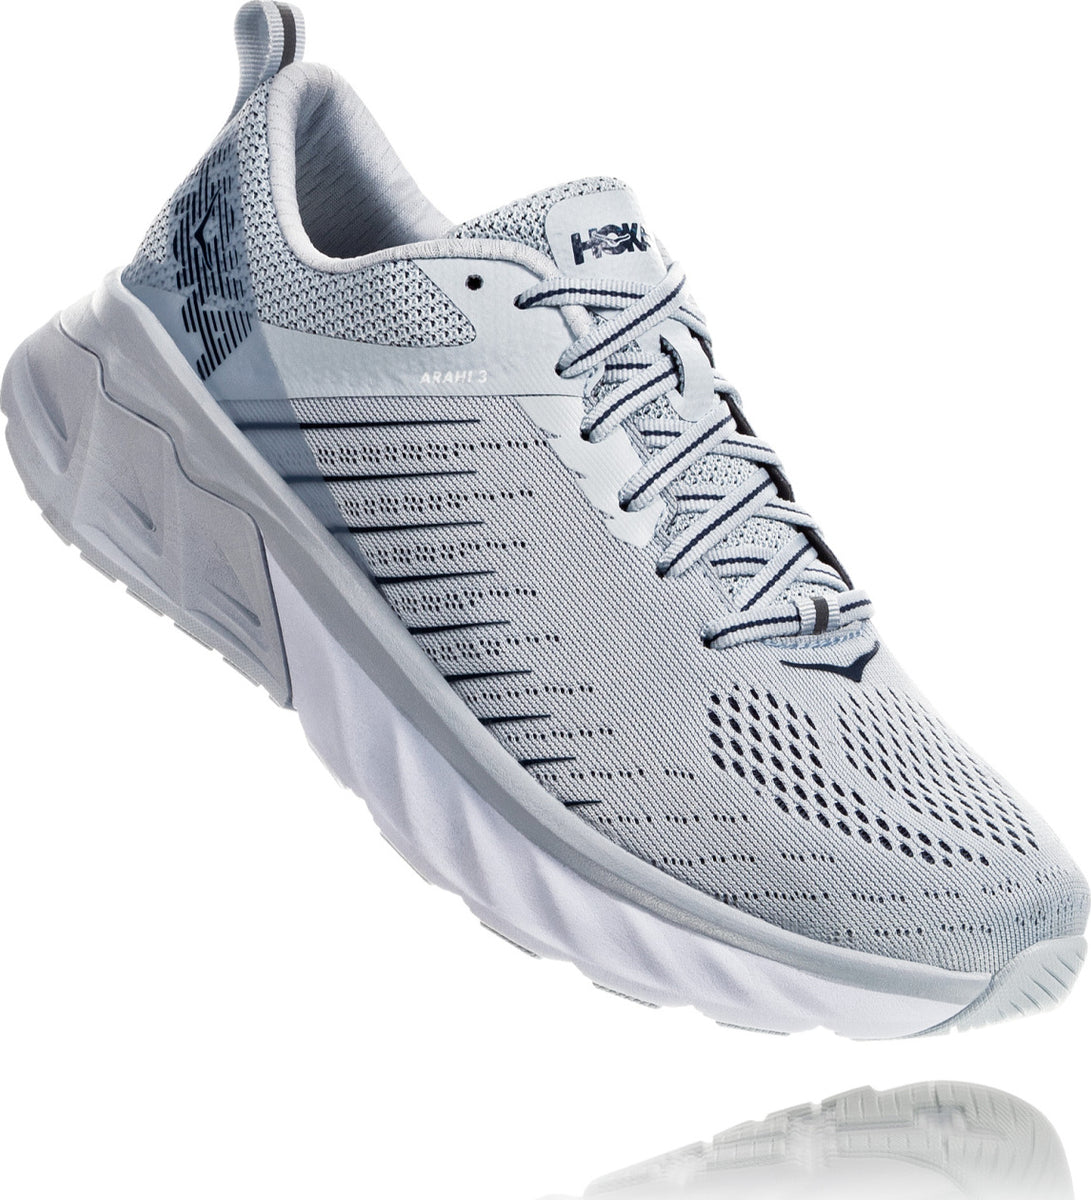 womens wide running shoes canada